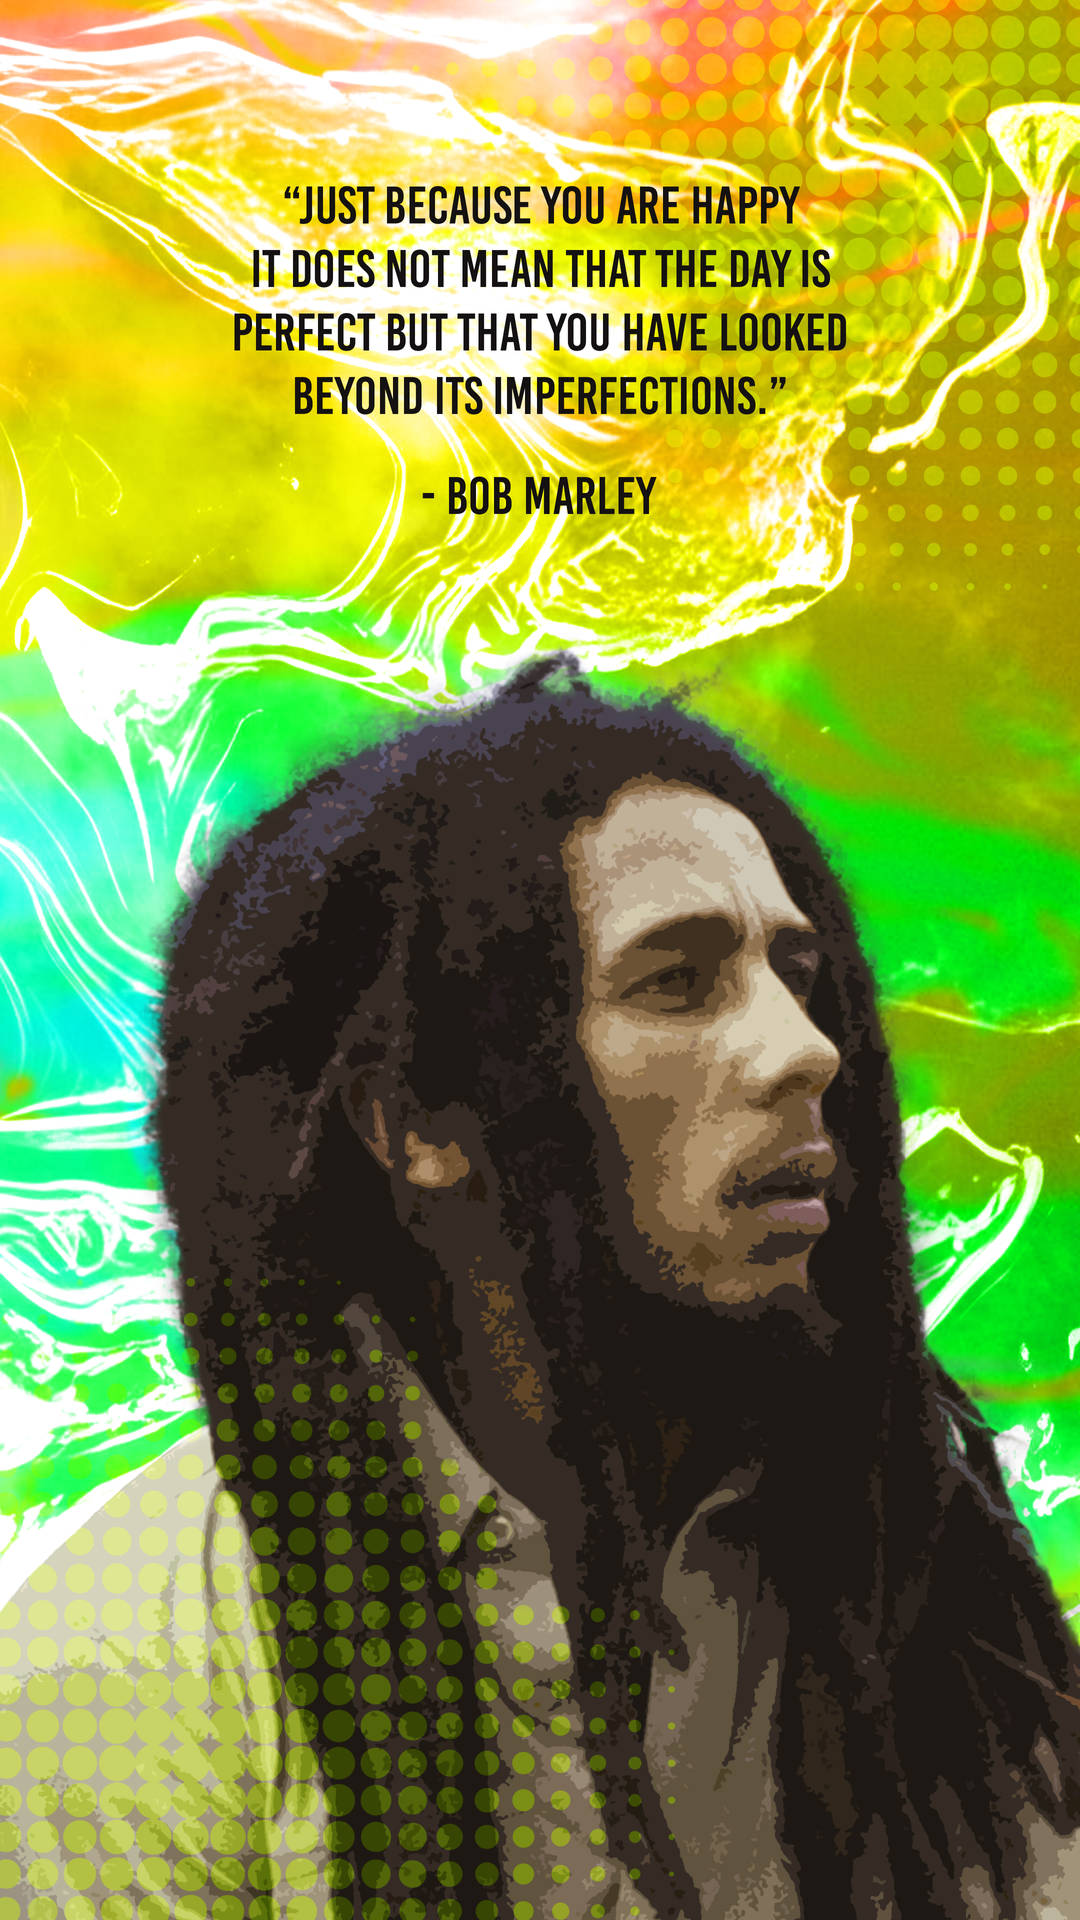 Bob Marley Imperfections Quote Wallpaper